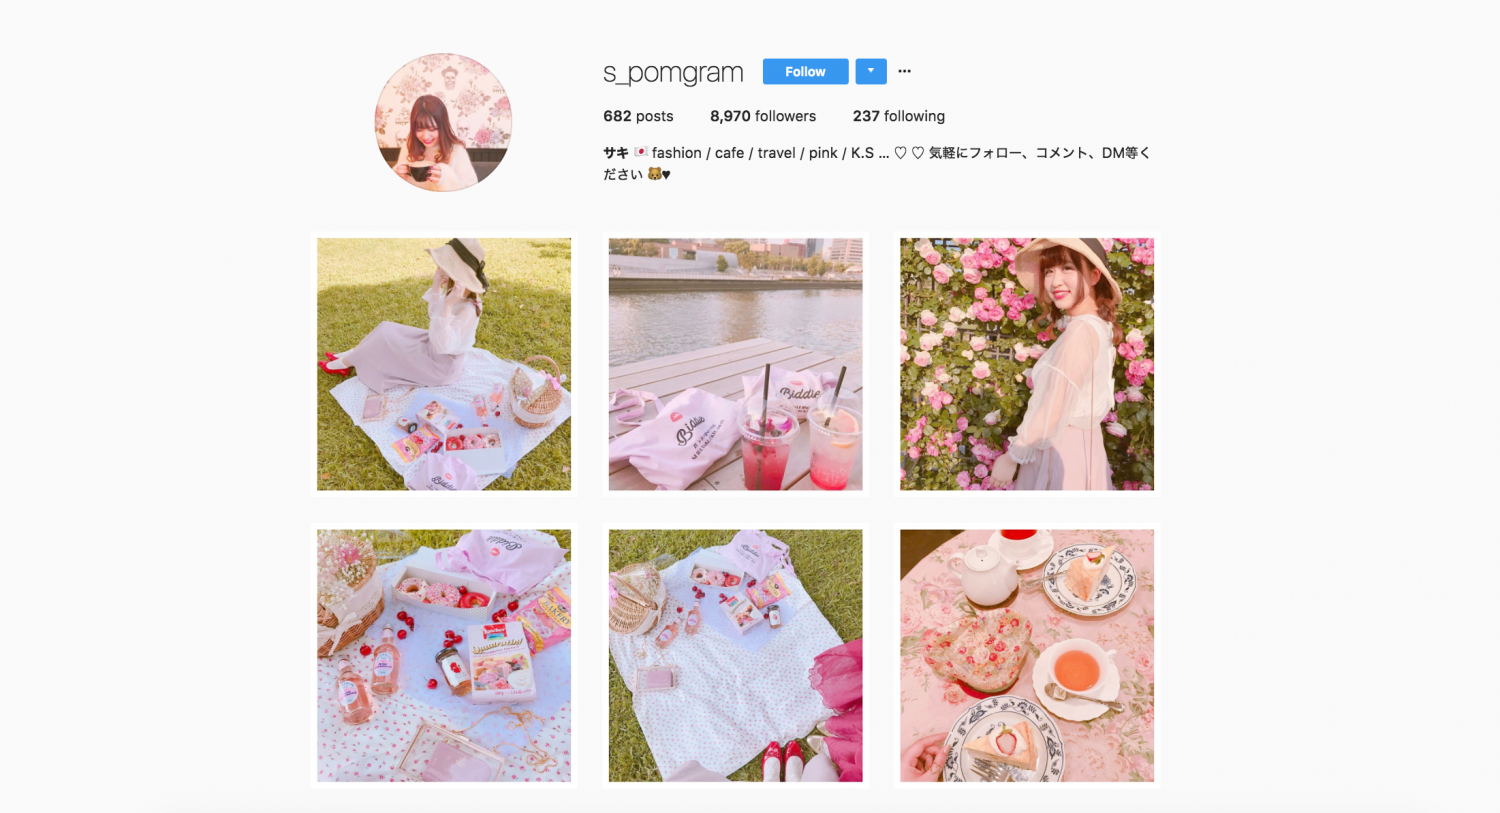 Instagram Famous in Japan: From Ordinary Girls to Social Media Superstars